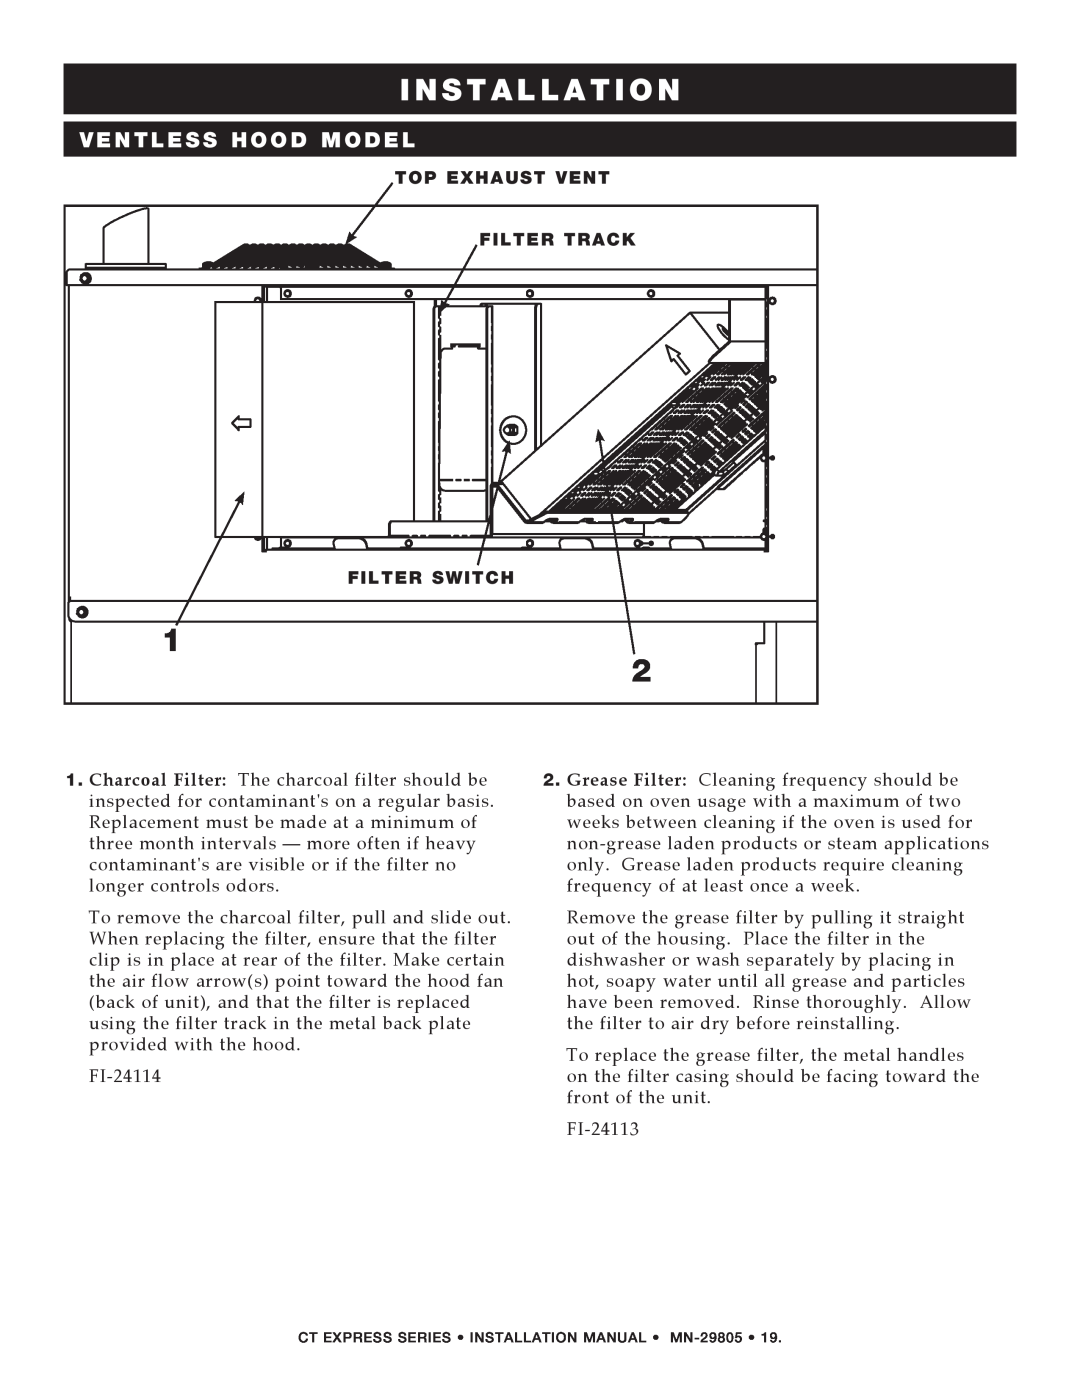 Alto-Shaam Combination Oven/Steamer manual I N S T A L L A T I O N, Ventless Hood Model, Top Exhaust Vent, Filter Track 